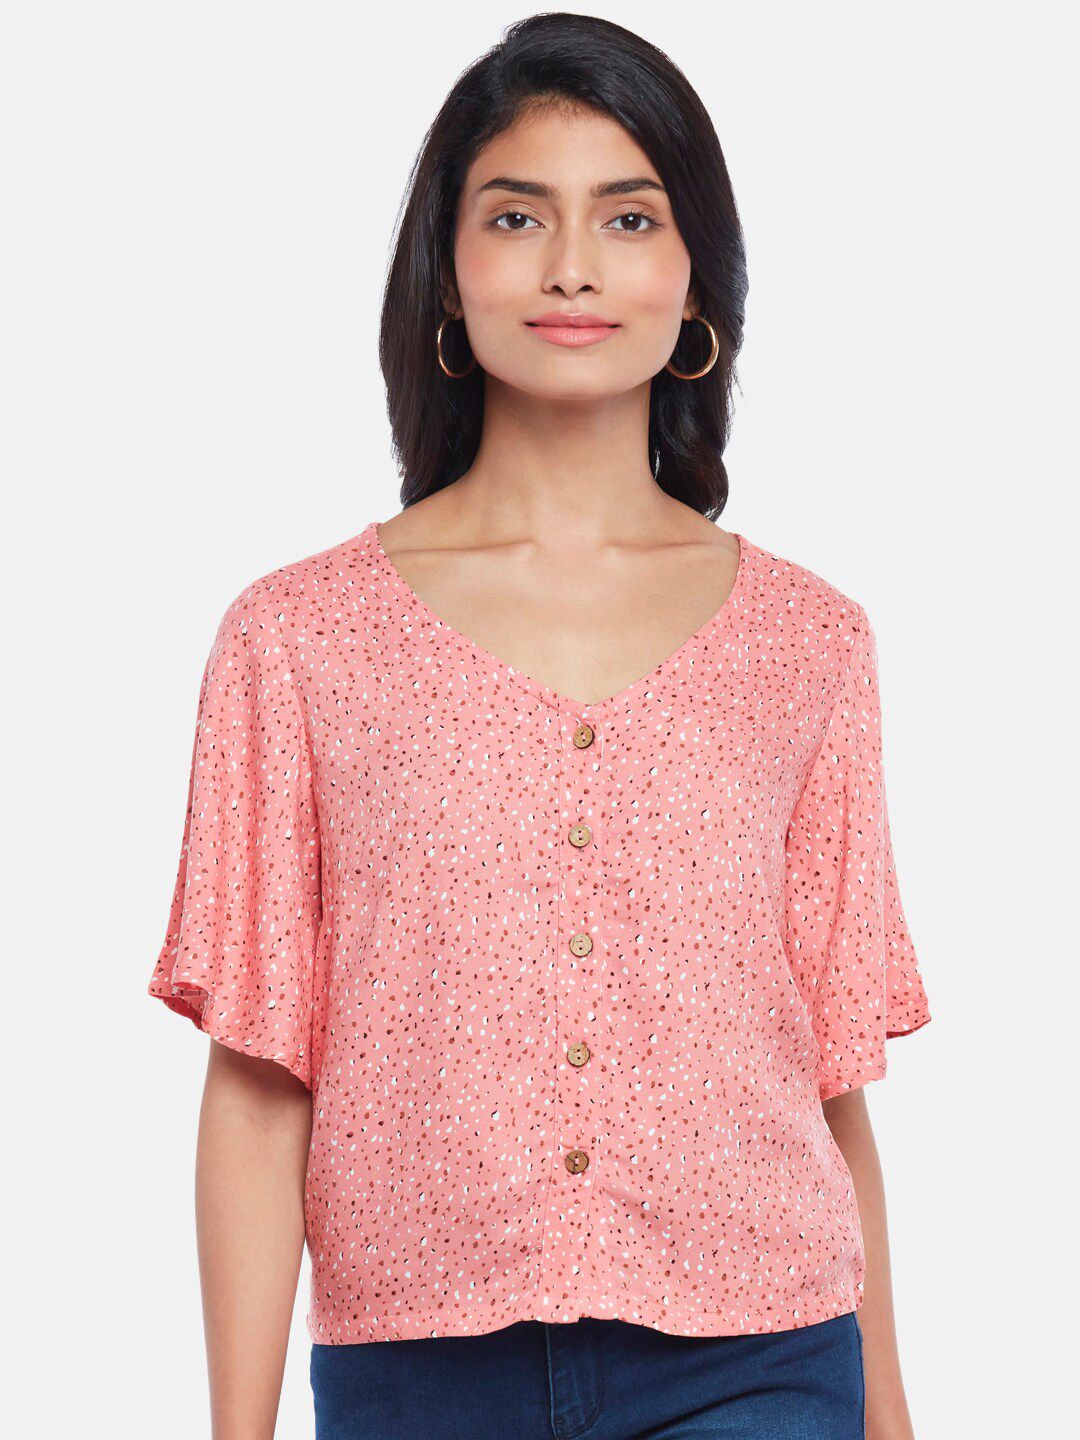 Honey by Pantaloons Pink Abstract Print Top Price in India